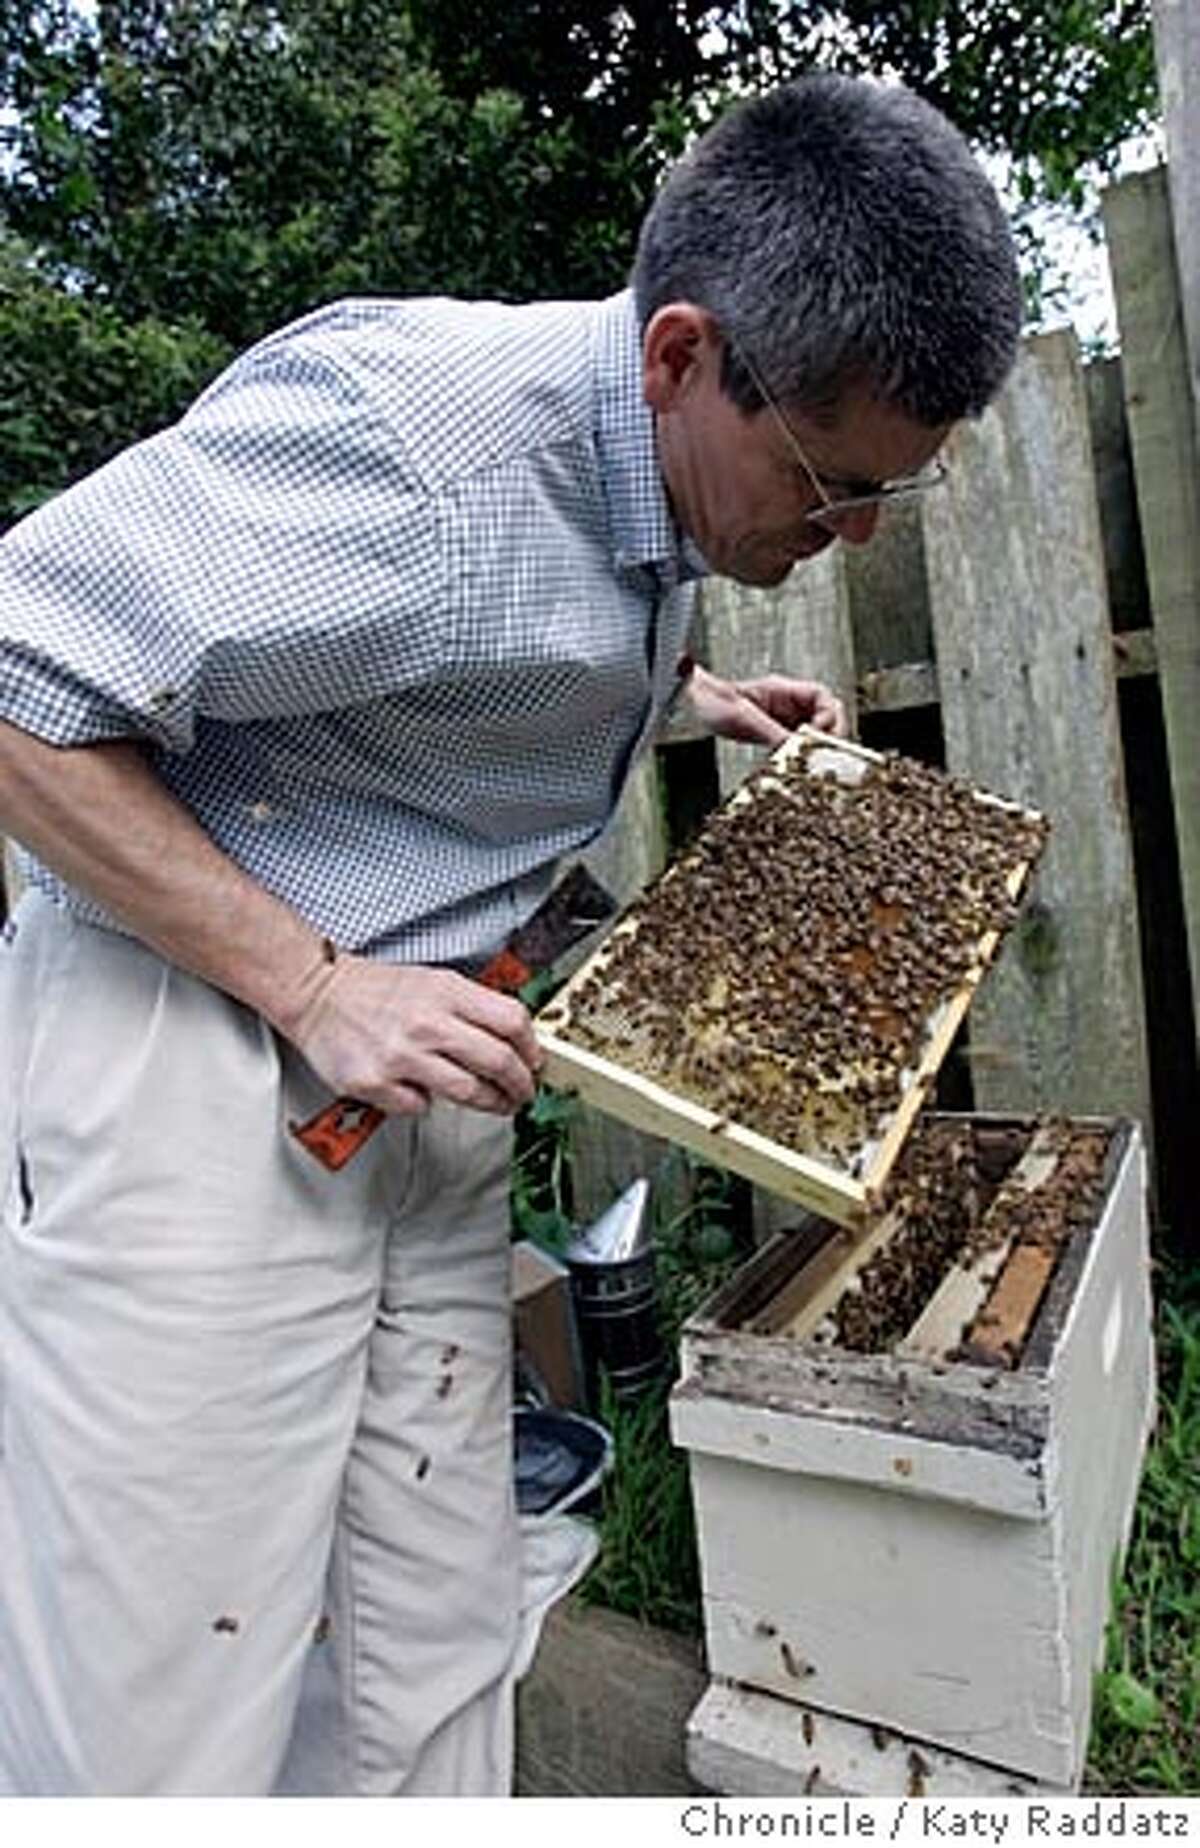 Tom Chester of San Francisco is a beekeeper in San Francisco. He is shown looking at one of the frames in his new hive to see if the bees are healthy (they are), and to see if there are any new eggs, which means he captured the queen when he captured this new swarm. Photo taken on 4/24/05, in SAN FRANCISCO, CA. By Katy Raddatz / The San Francisco Chronicle